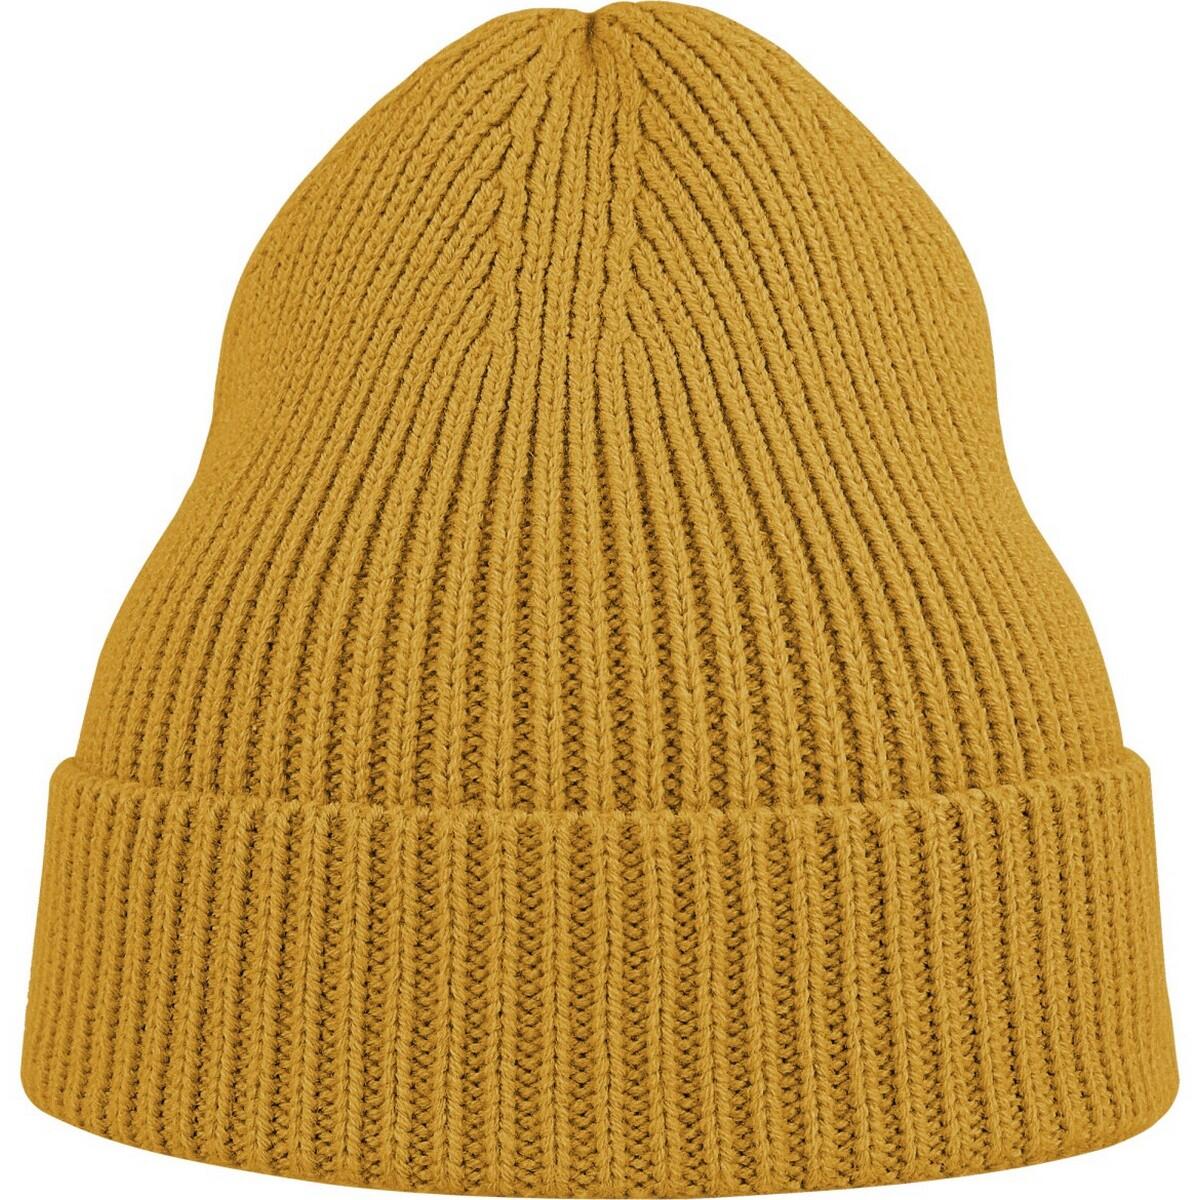 ATLANTIS Unisex Adult Andy Recycled Polyester Beanie (Mustard)